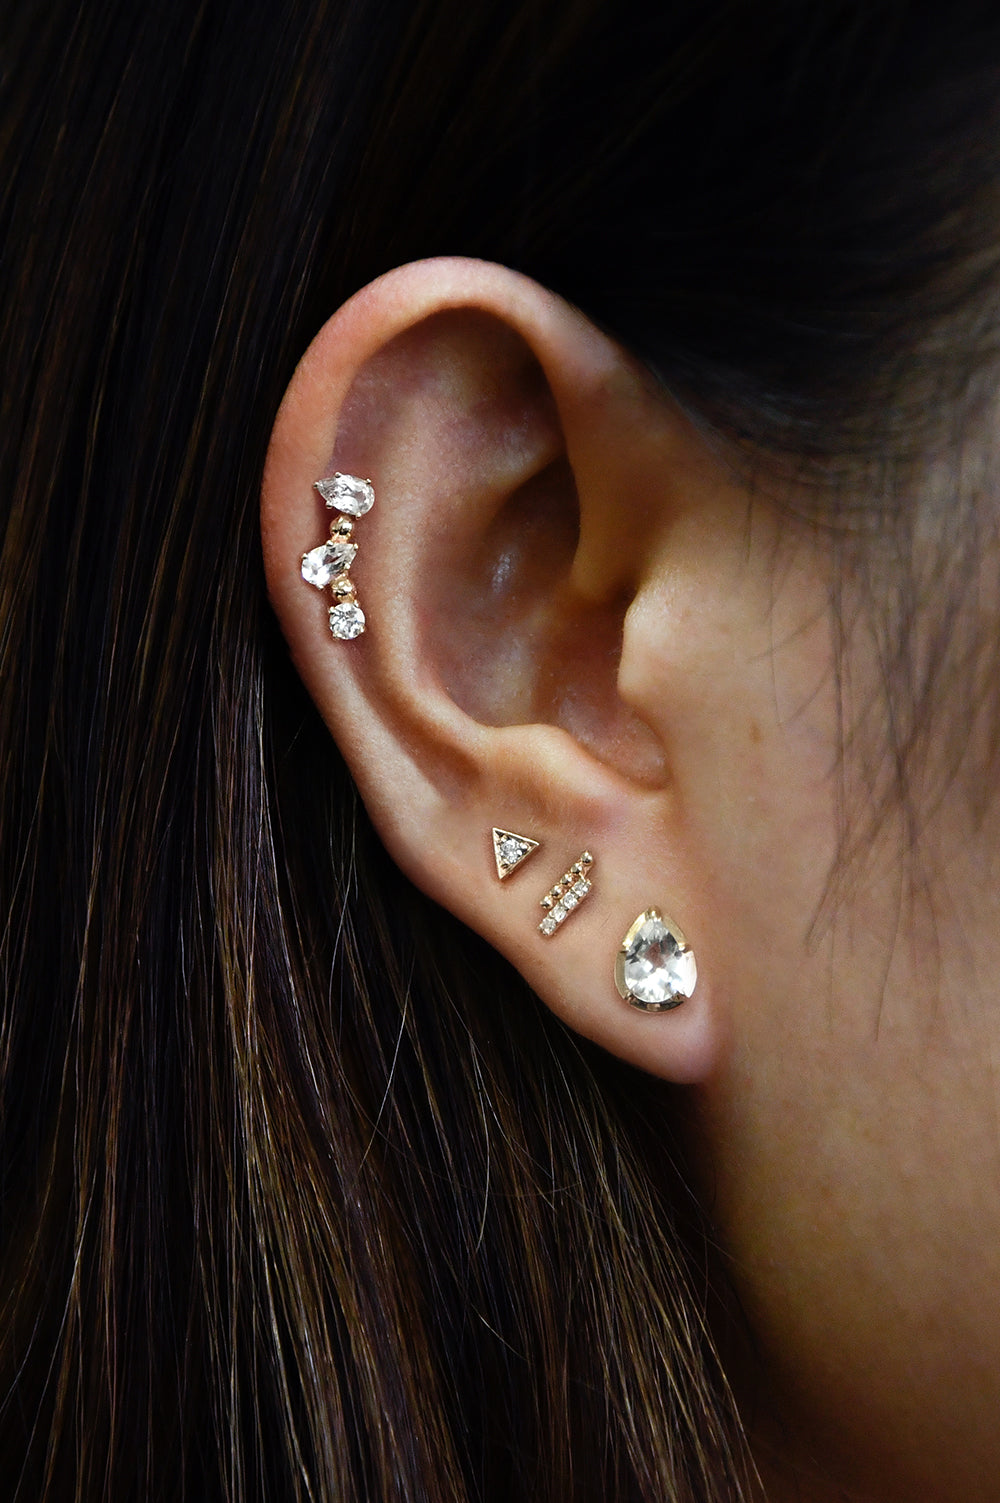 Dew Drop Diamond and Gold Two Row Studs